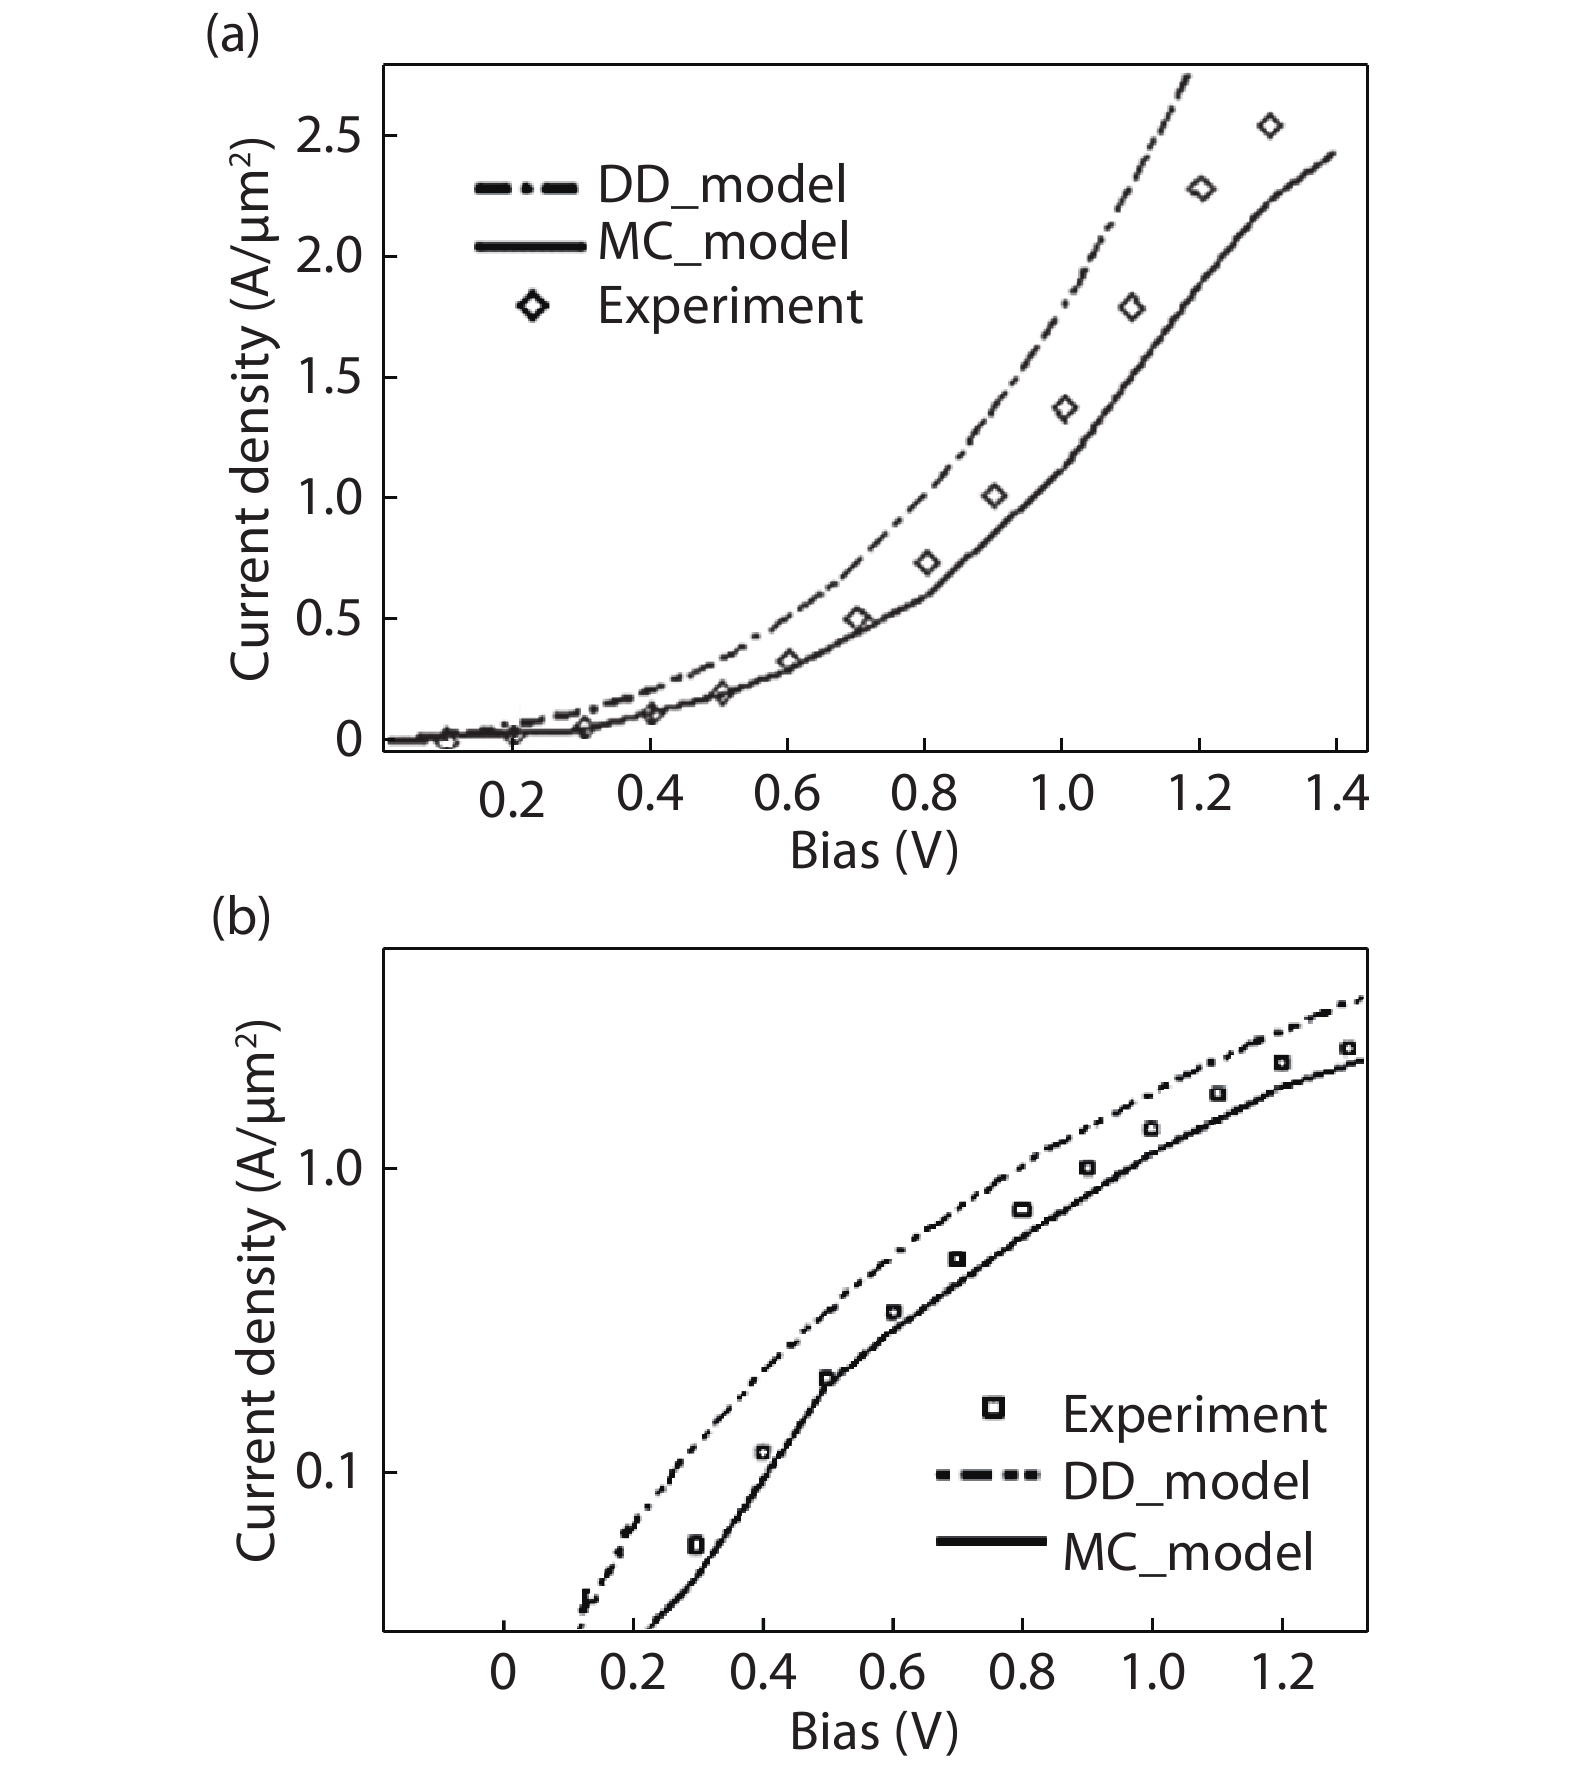 Comparison of the experimental results (diamond), the drift-diffusion (broken line) and Monte Carlo (solid line) simulation models. Result shows that the MC model has better agreement with the experimental results than the DD model lower bias (a) linear (b) logarithmic plots.